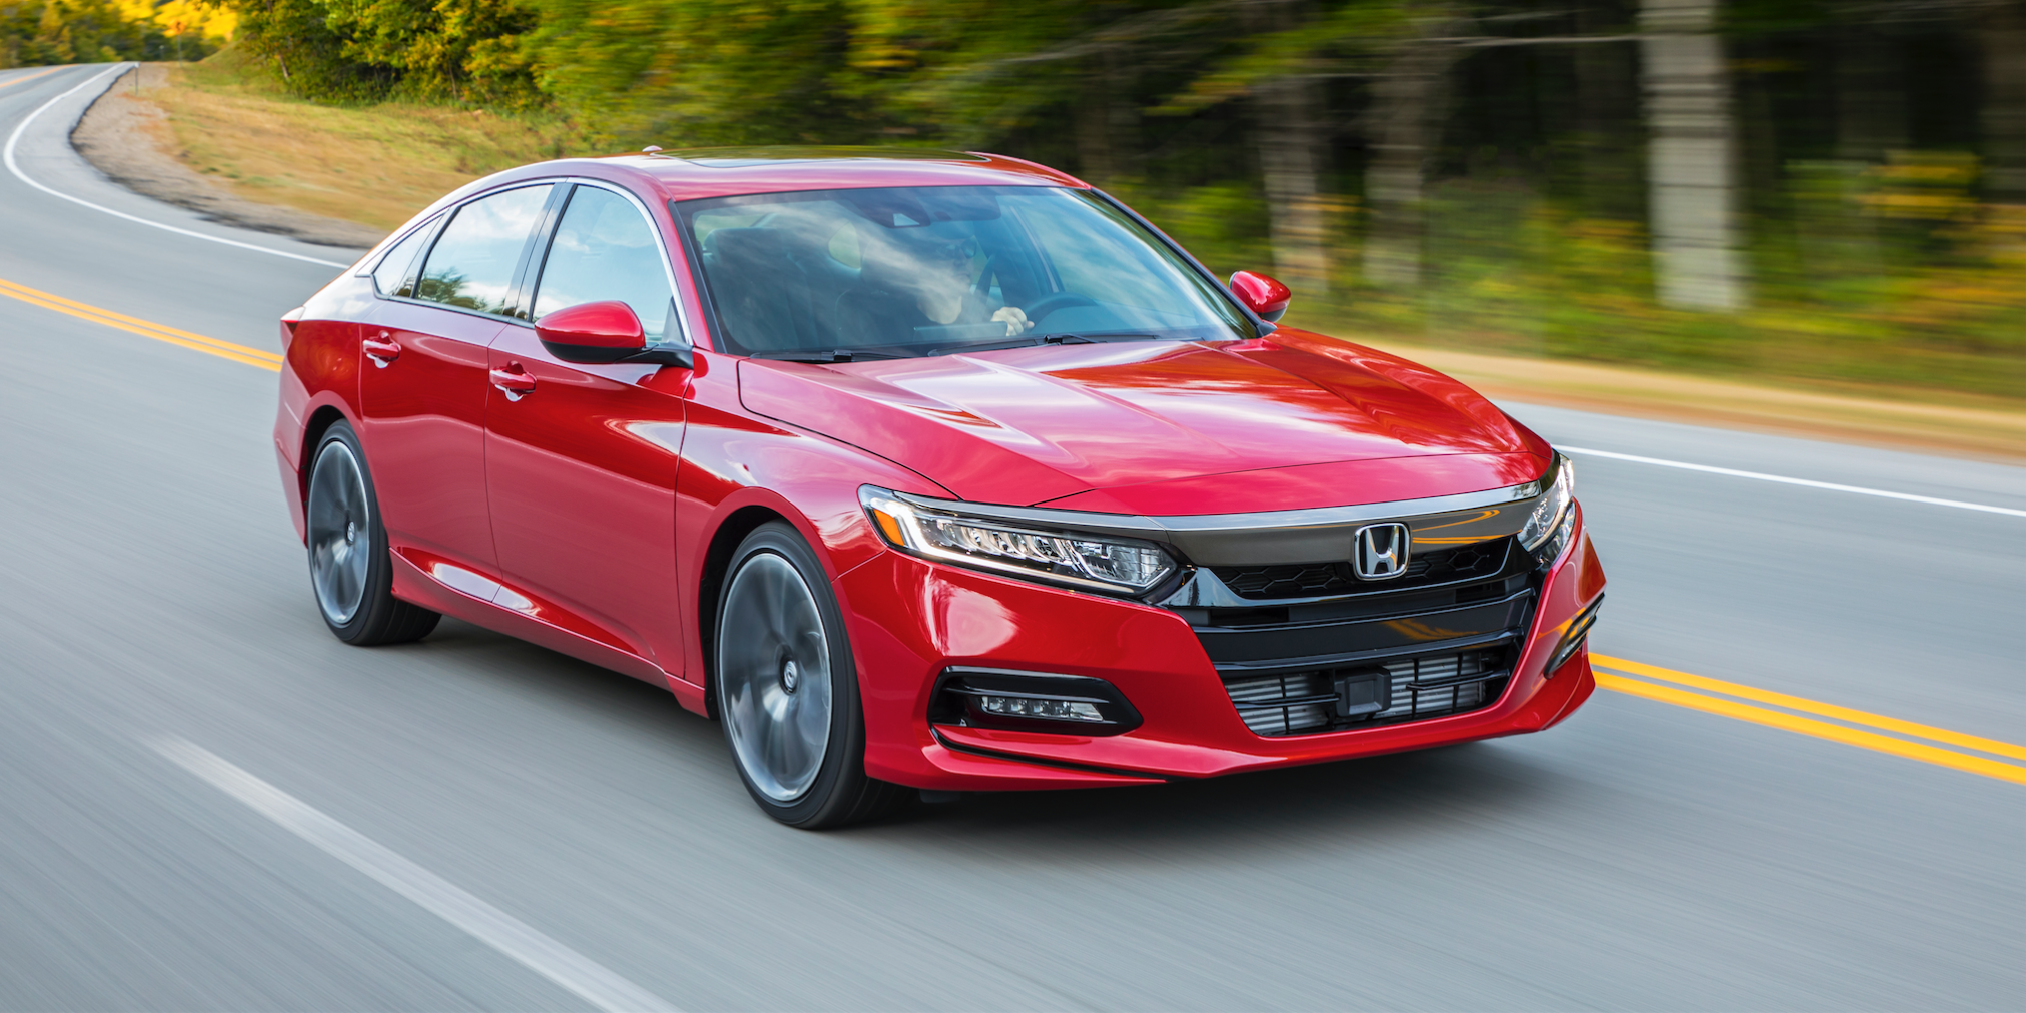 2020 Honda Accord Prices Rise By 185 385